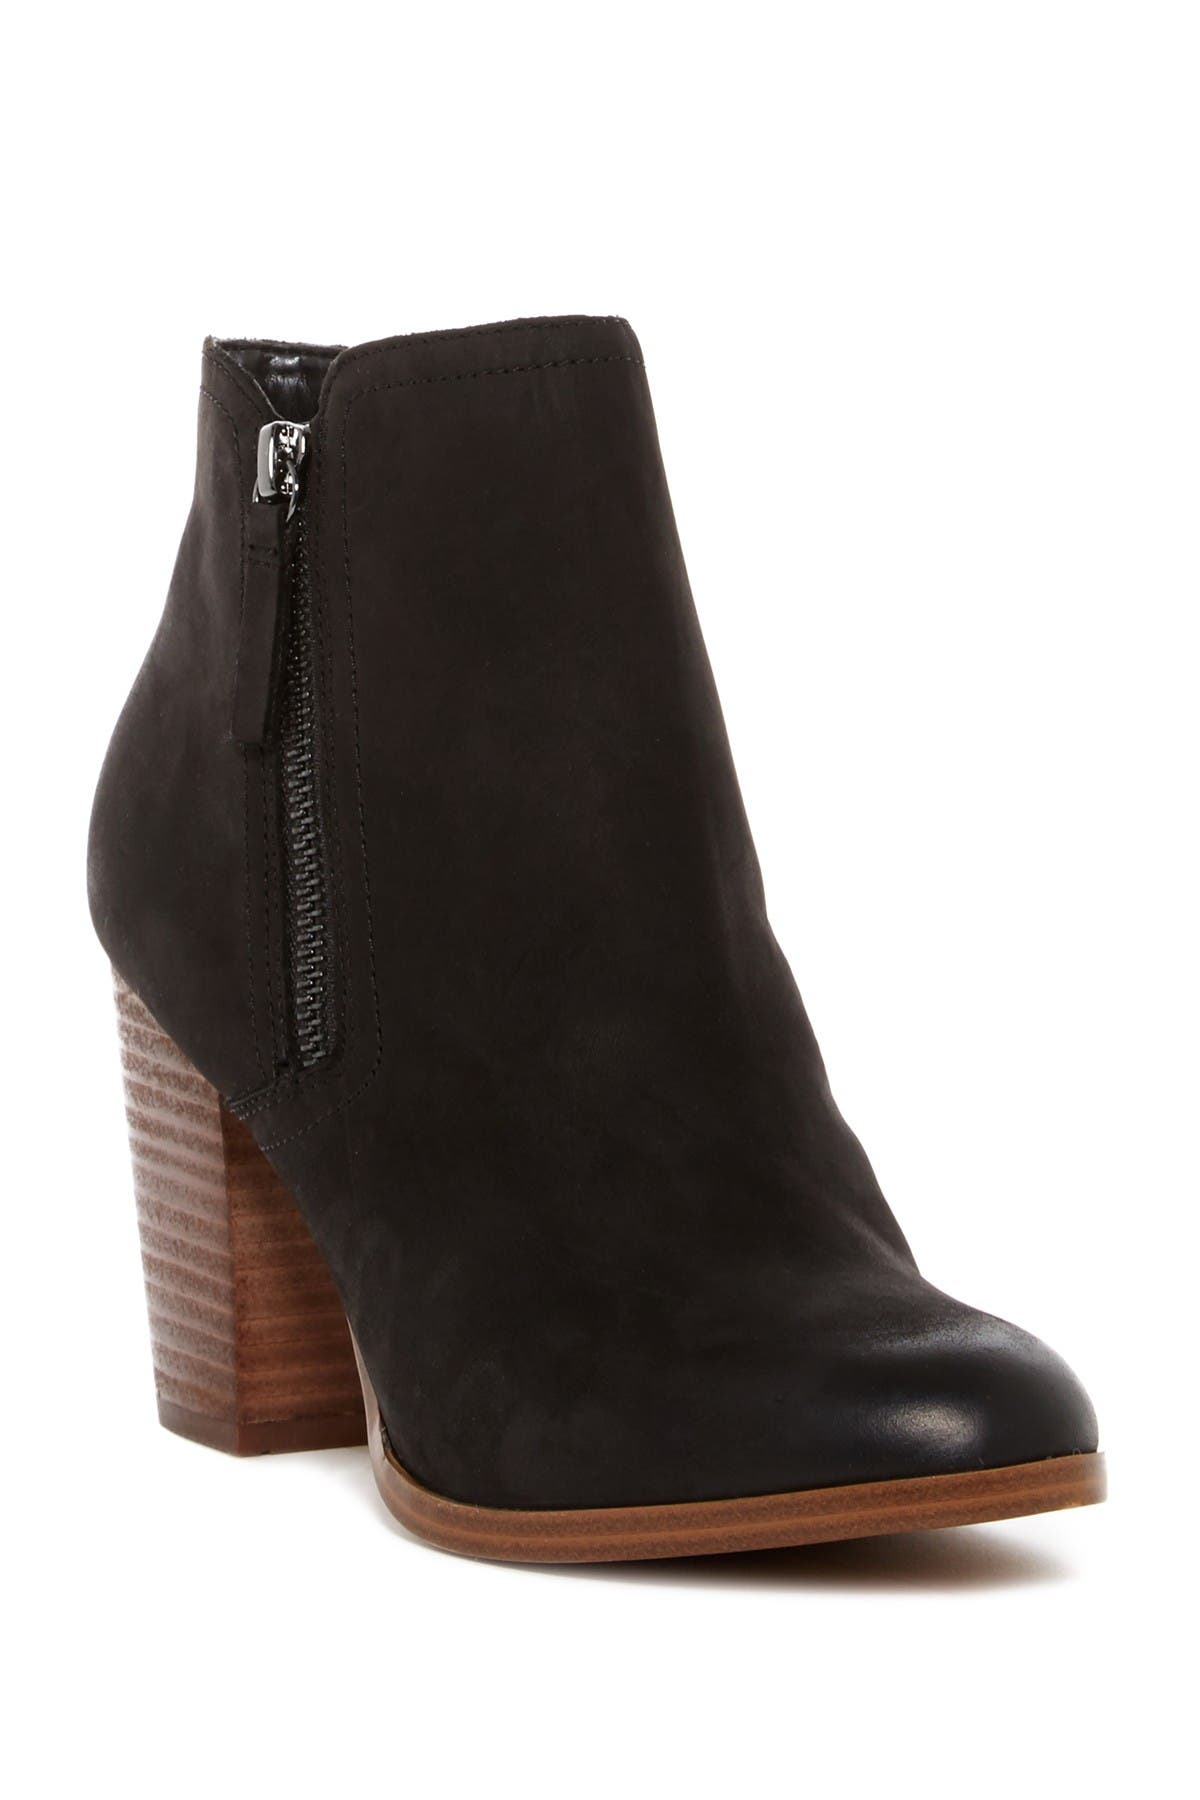 aldo emely ankle boots